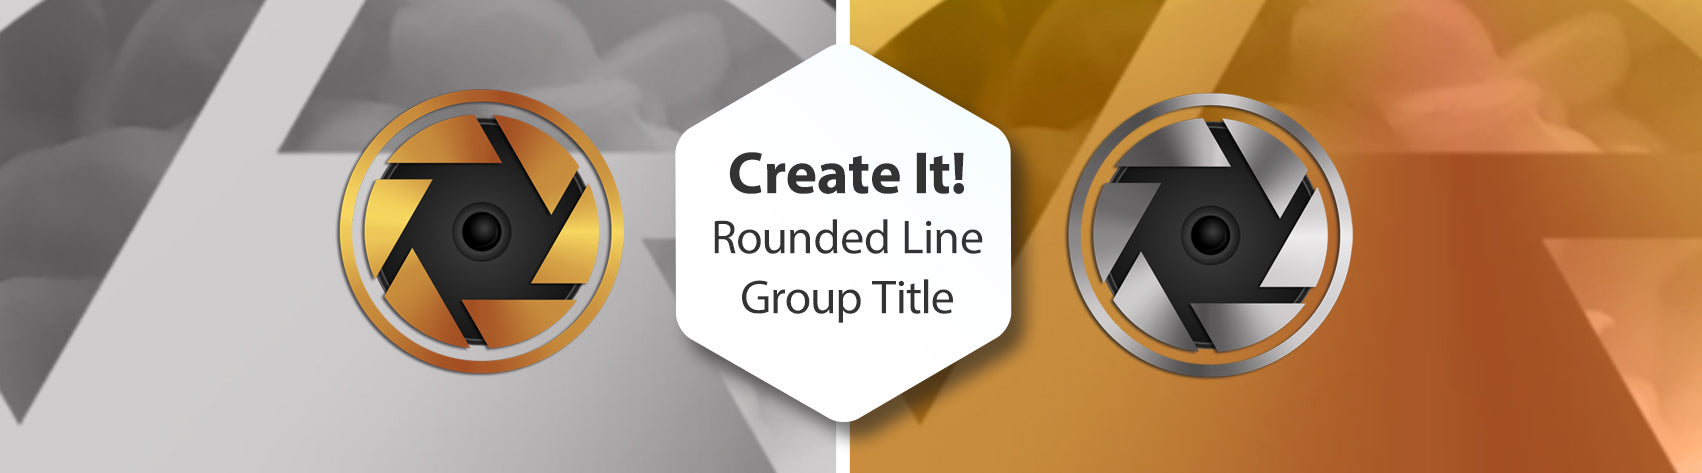 Create It! Rounded Line Group Title